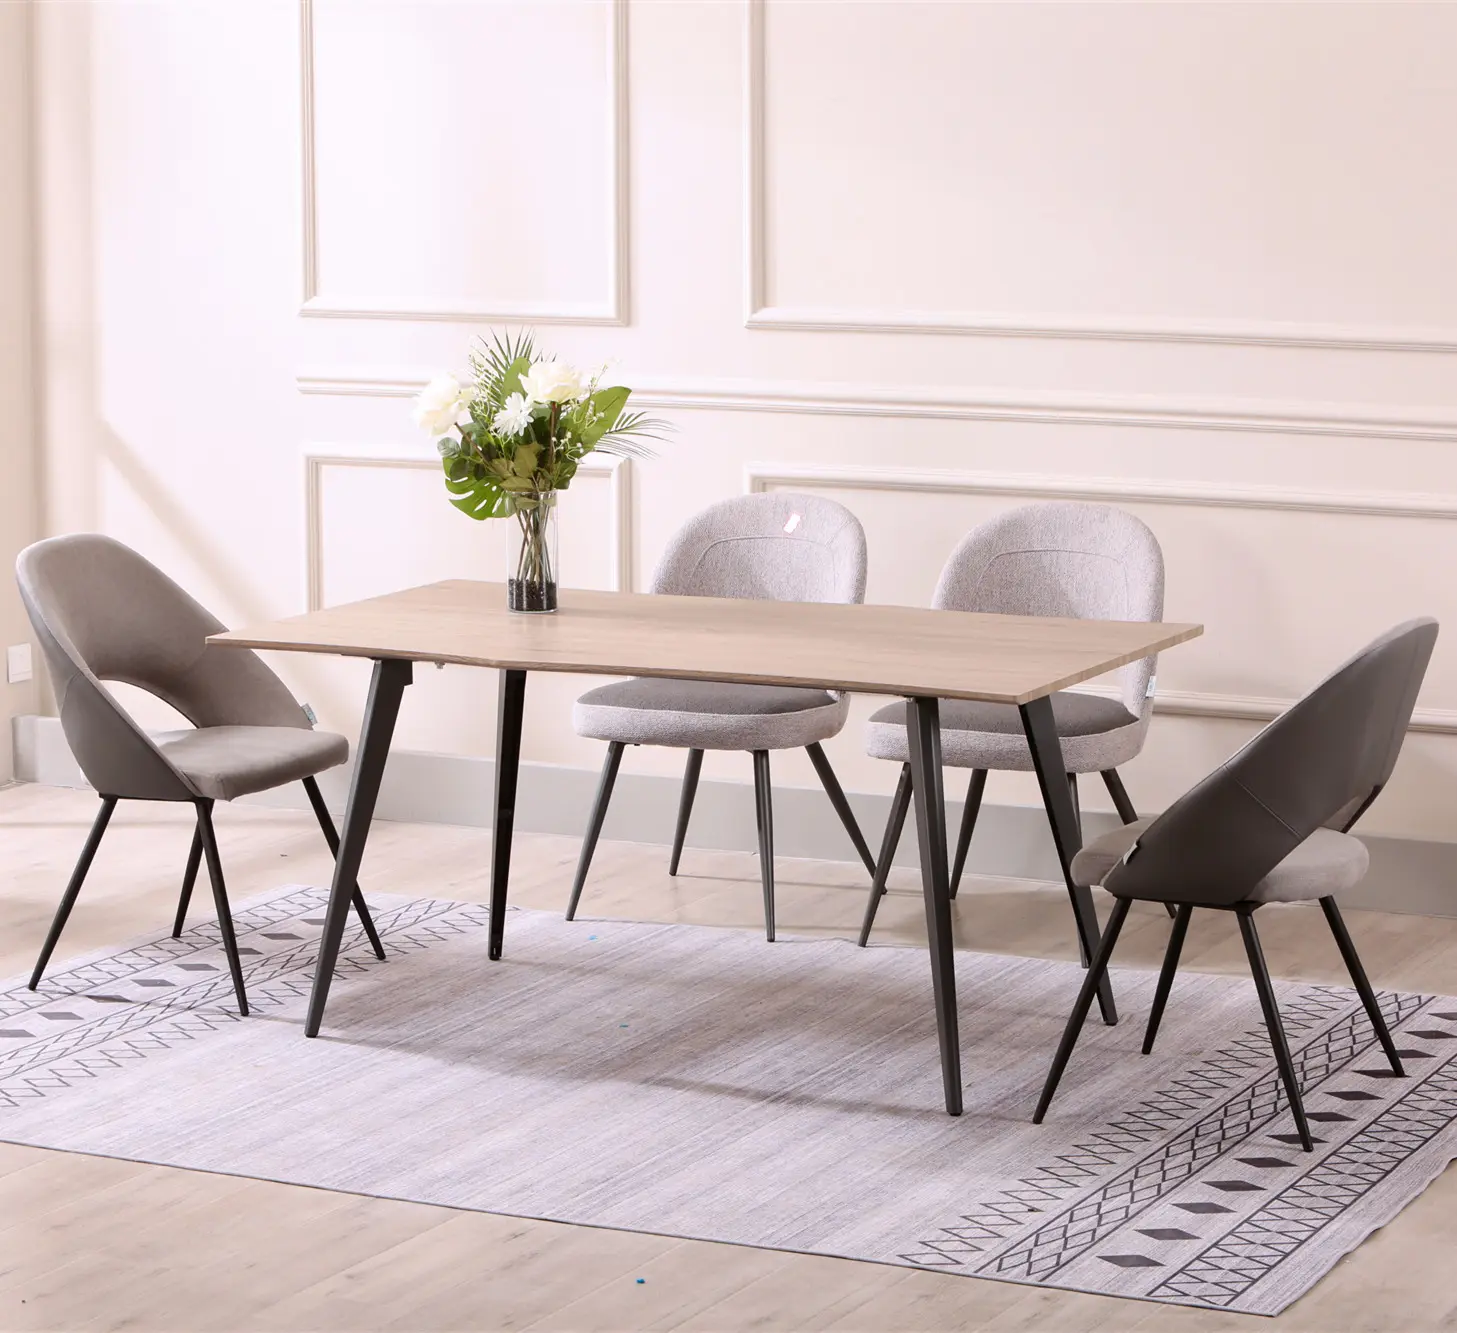 Free Sample Low Price MDF Dining Room Furtniure Modern Dining TableとChair Dining Table Set